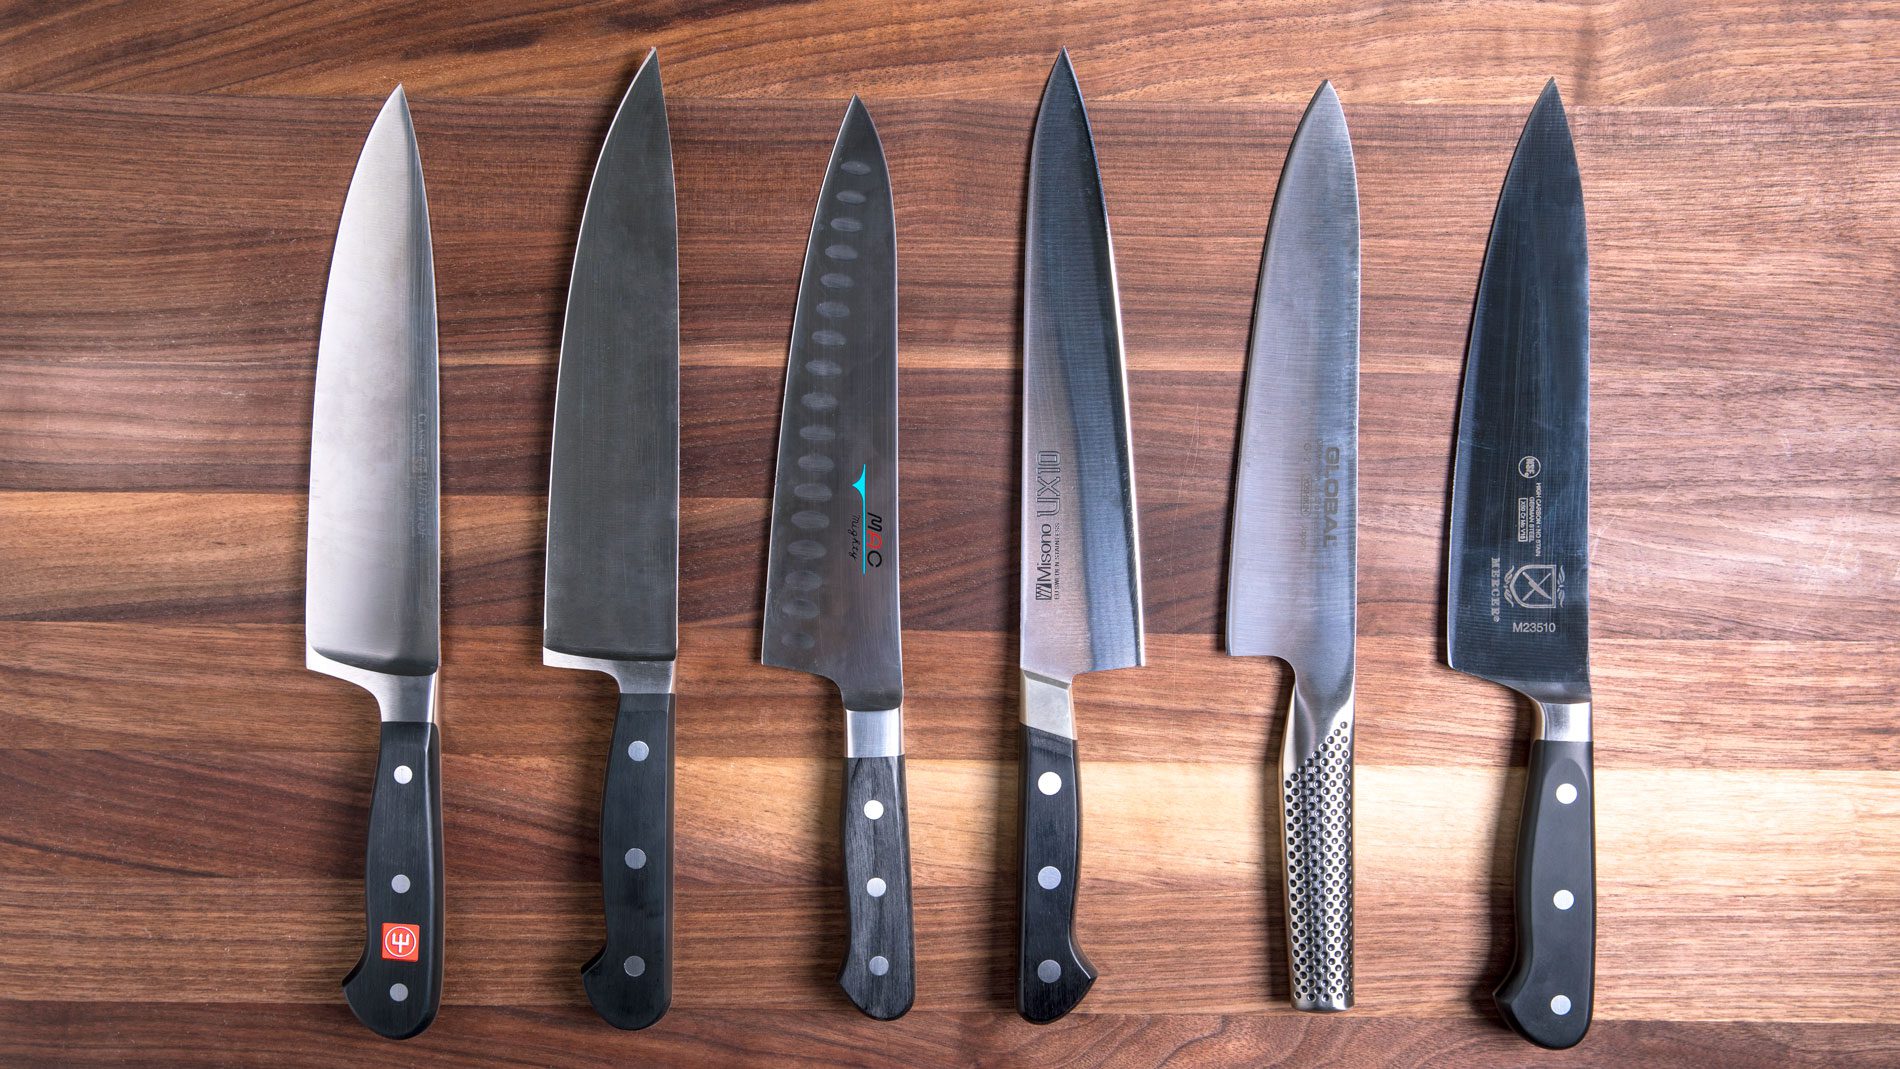 Uses of the best chef knife: